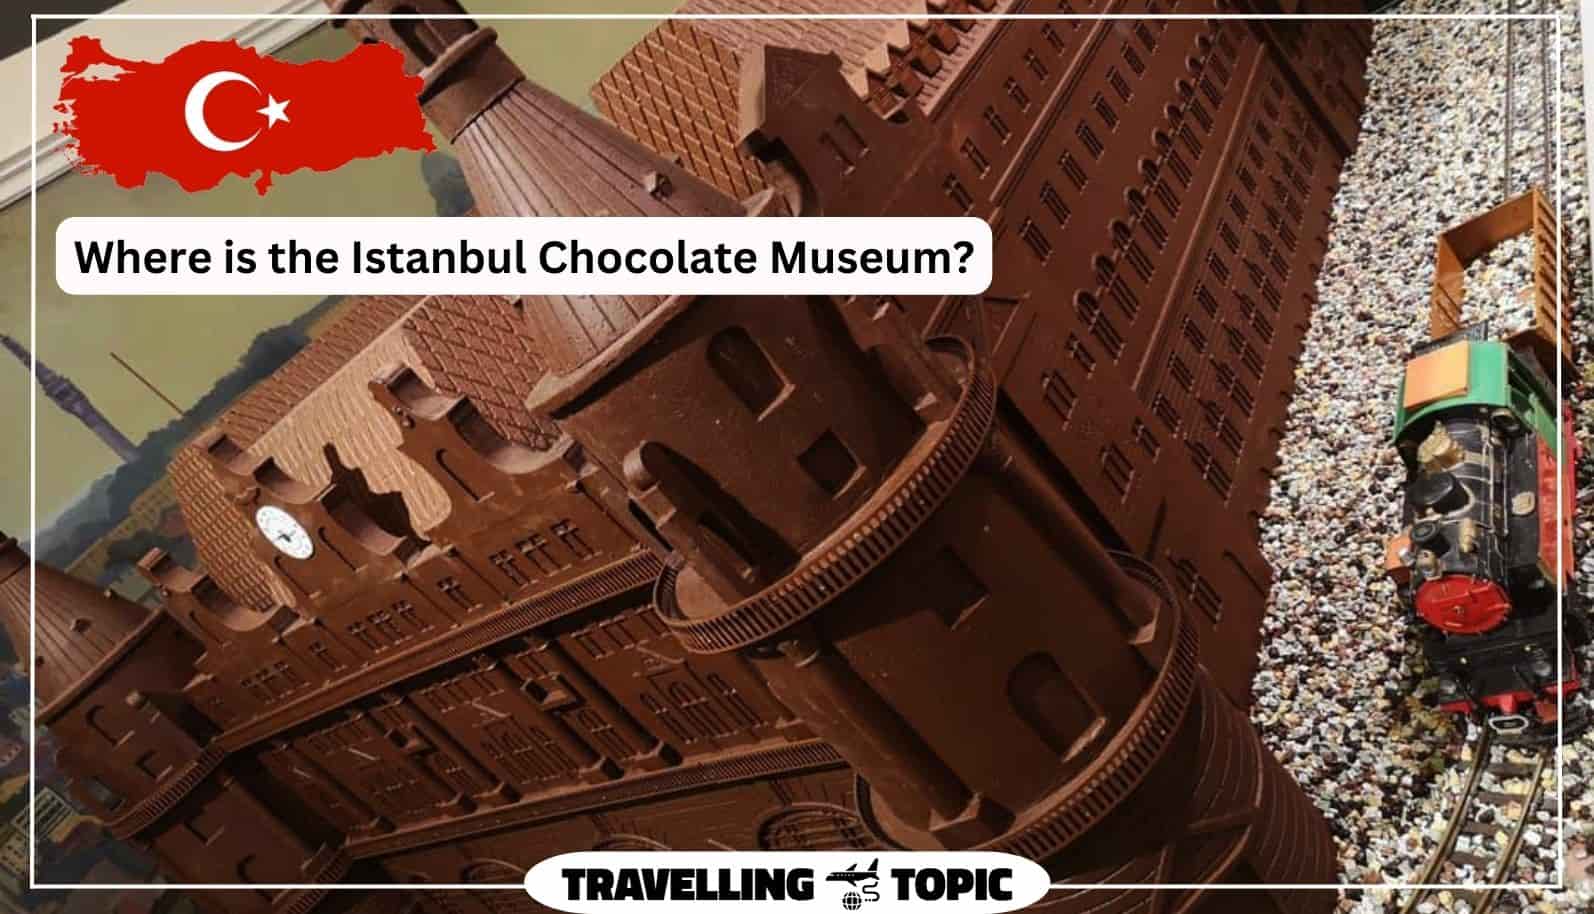 Where is the Istanbul Chocolate Museum